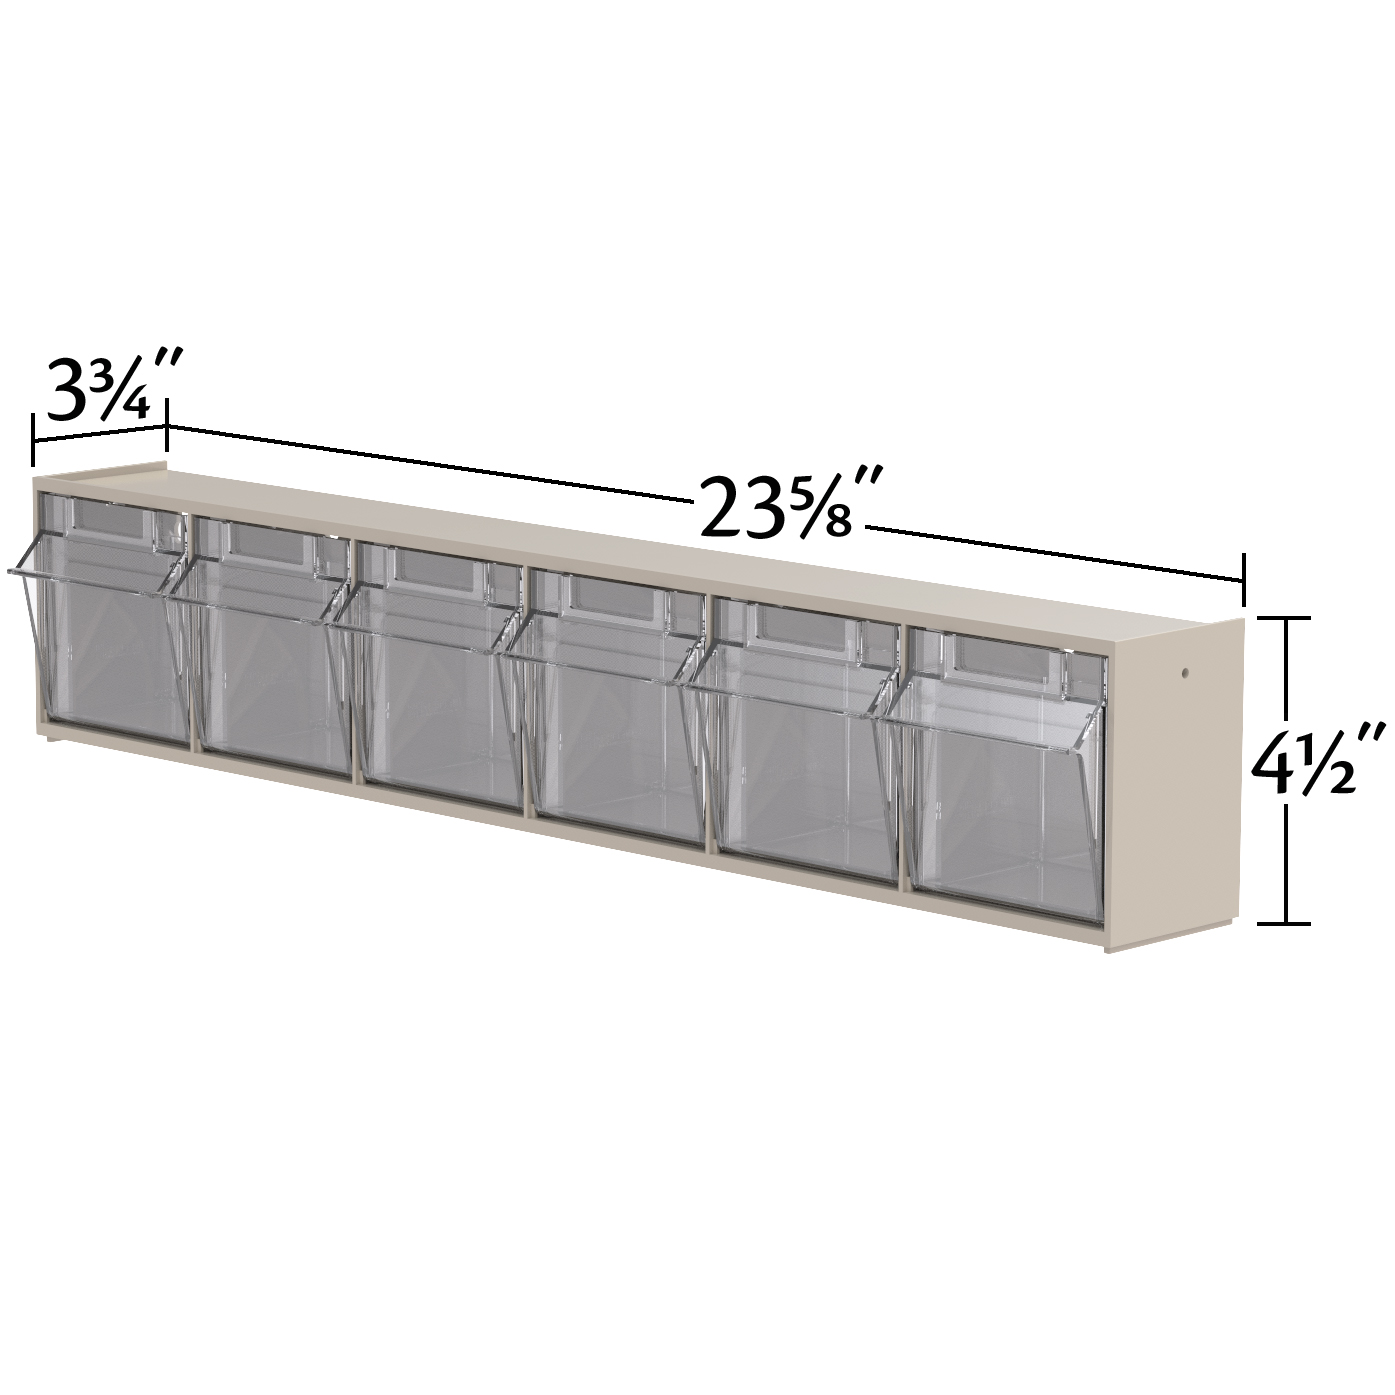 Akro-Mils TiltView Horizontal Plastic Organizer Storage System Cabinet with 6 Tip Out Bins, (23-5/8-Inch Wide x 4-1/2-Inch High x 3-3/4-Inch Deep), Stone 06706 - image 4 of 7